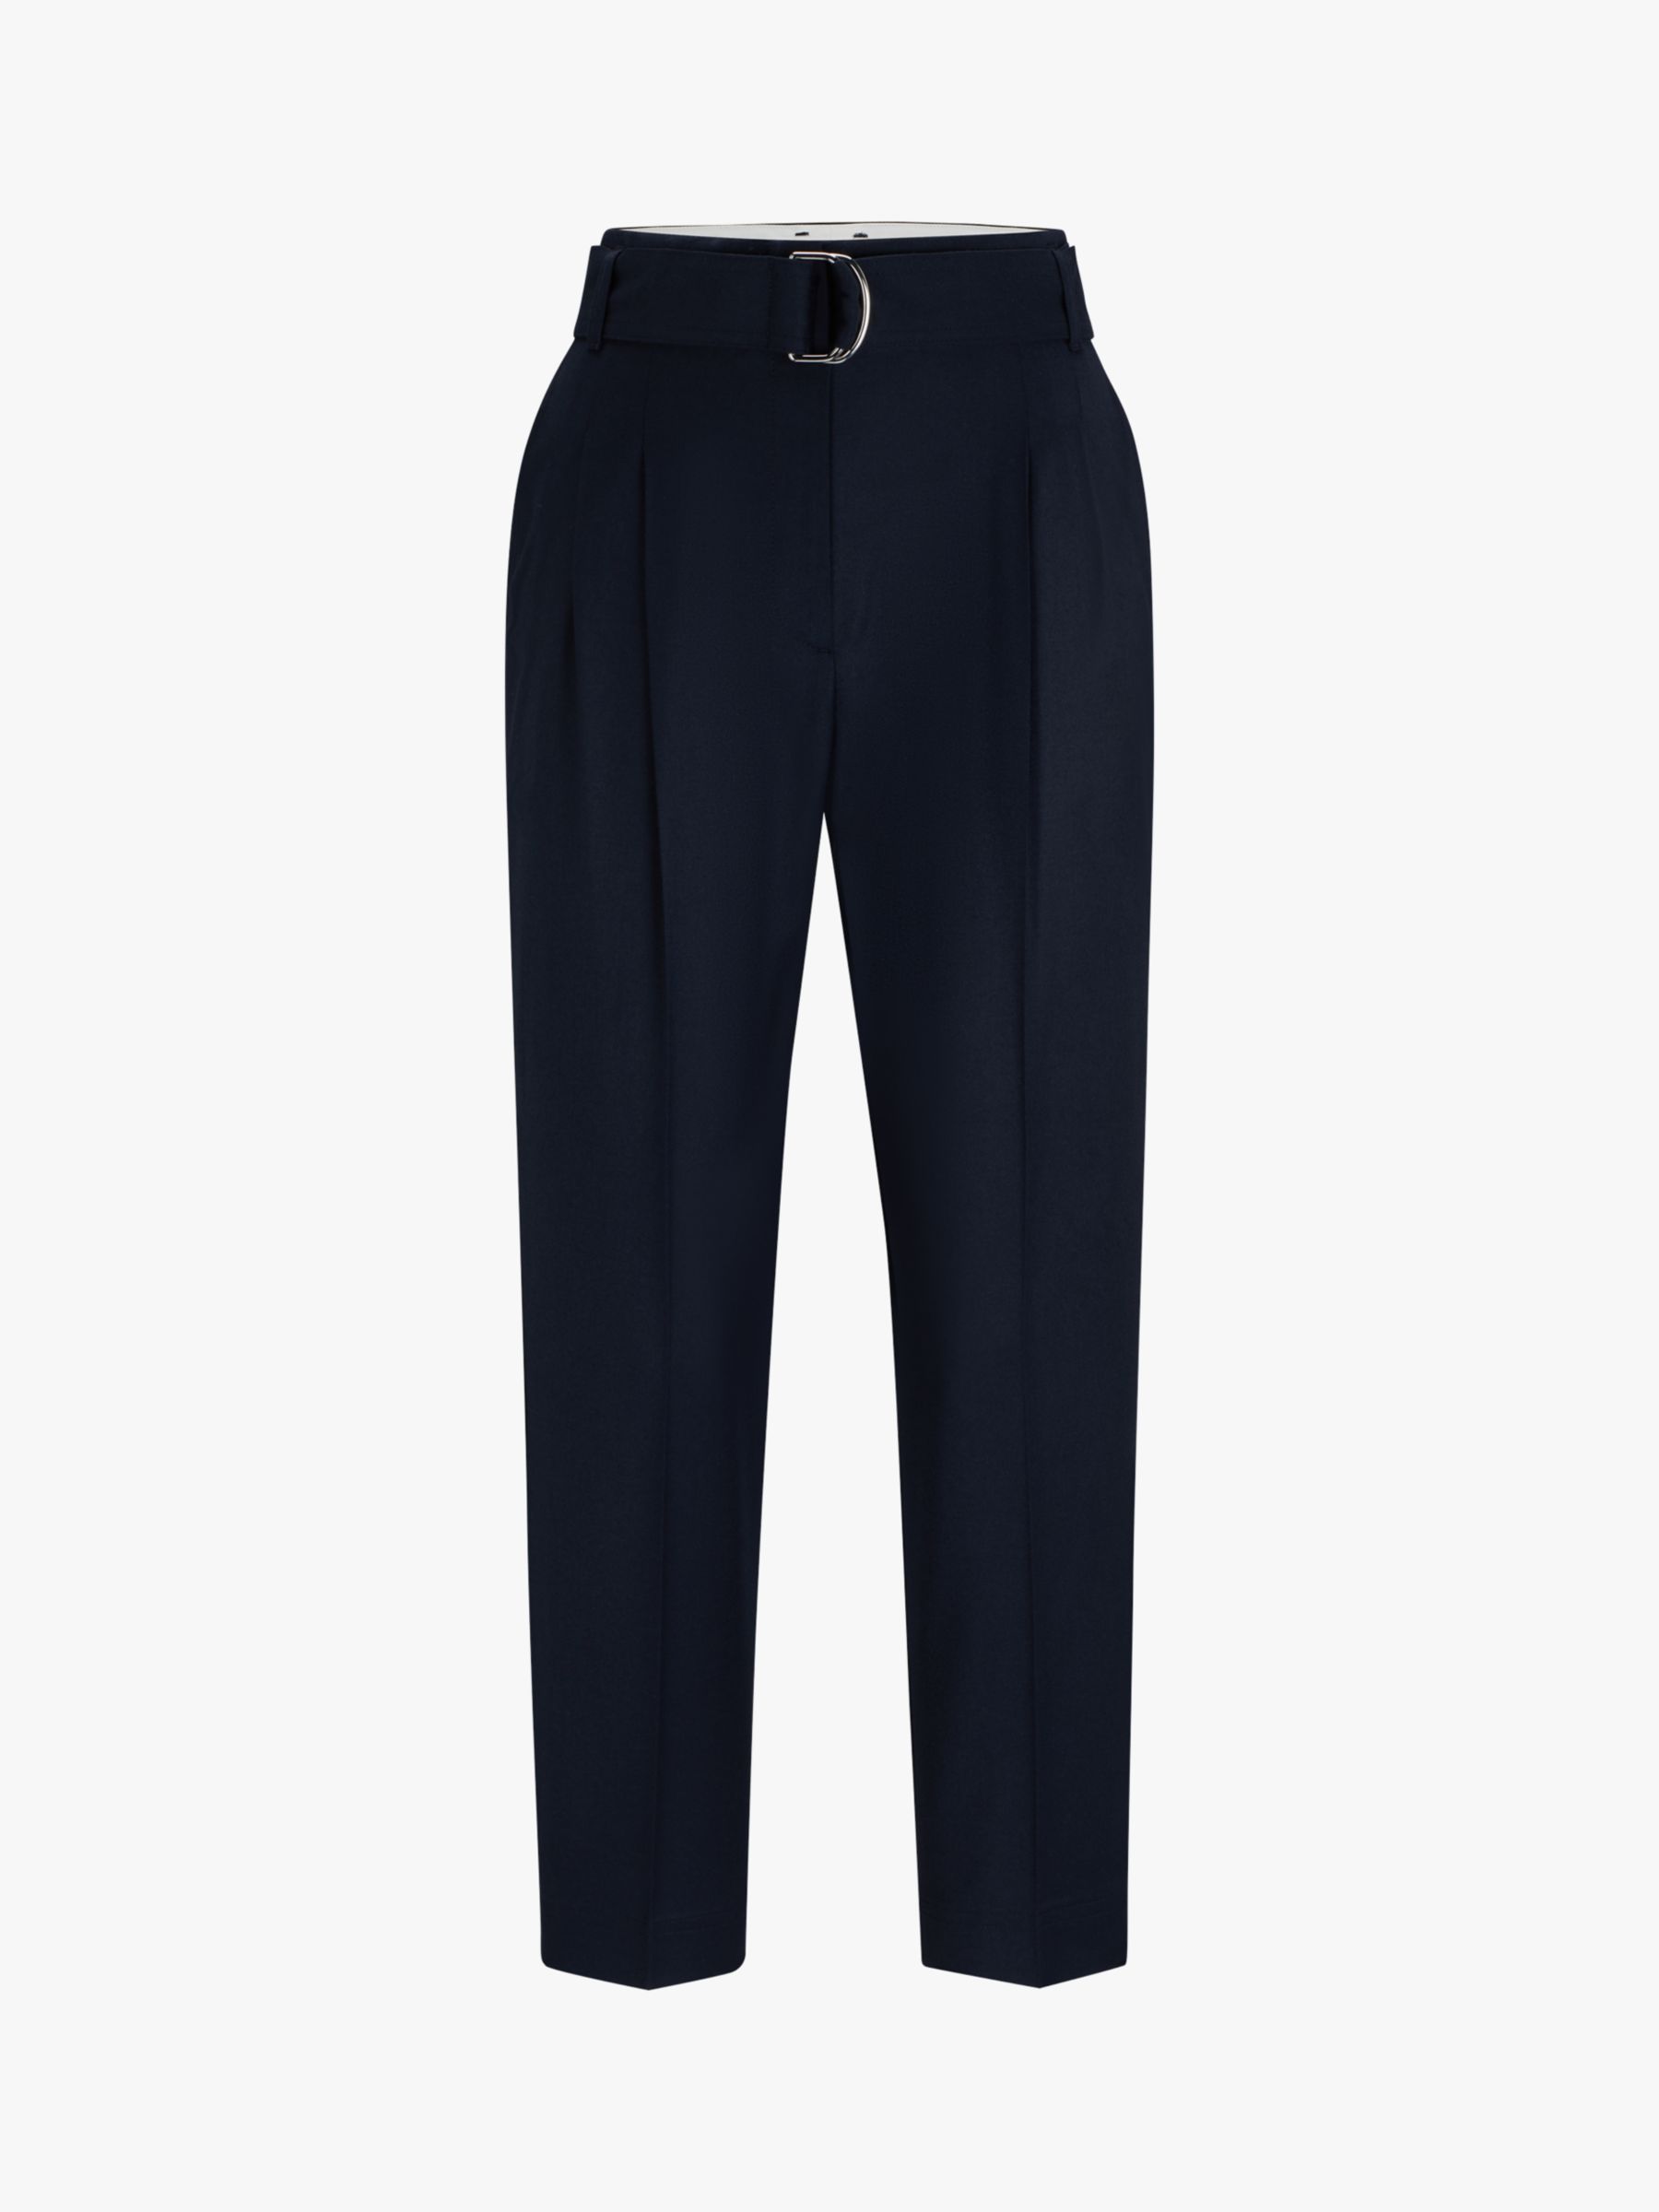 BOSS Tapiah Belted Wool Trousers, Navy at John Lewis & Partners